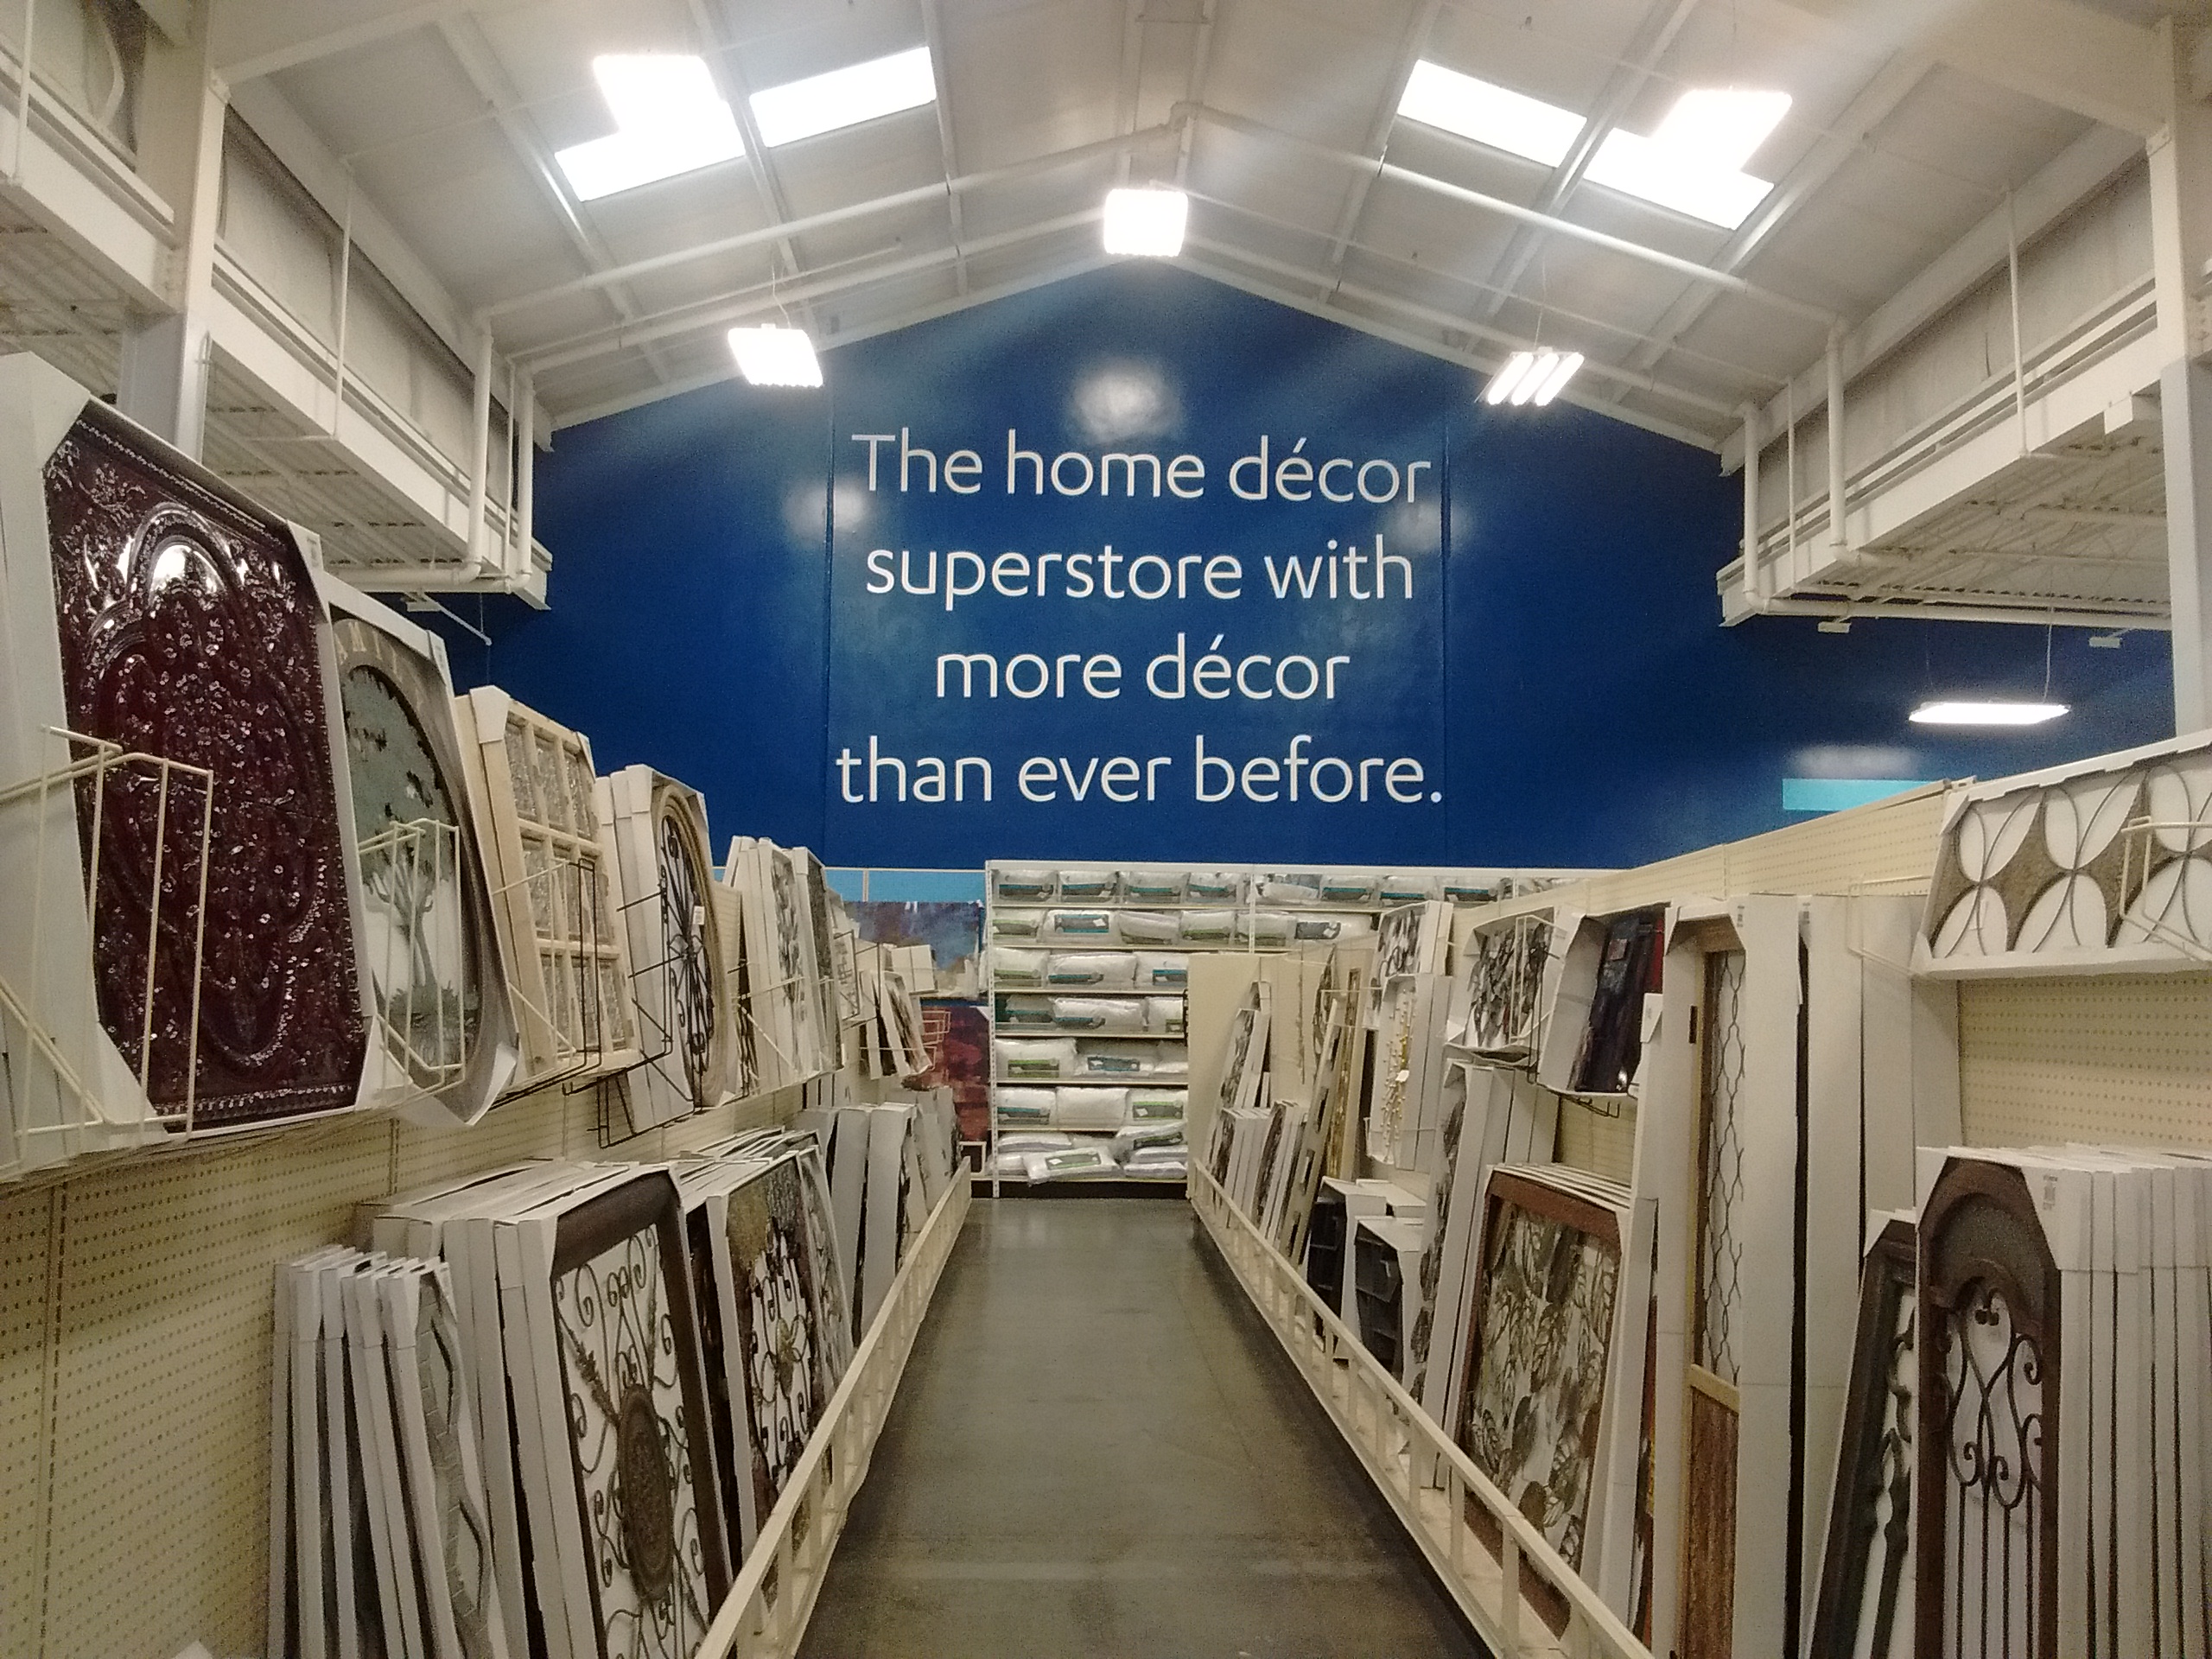 Home decor superstore At Home signage